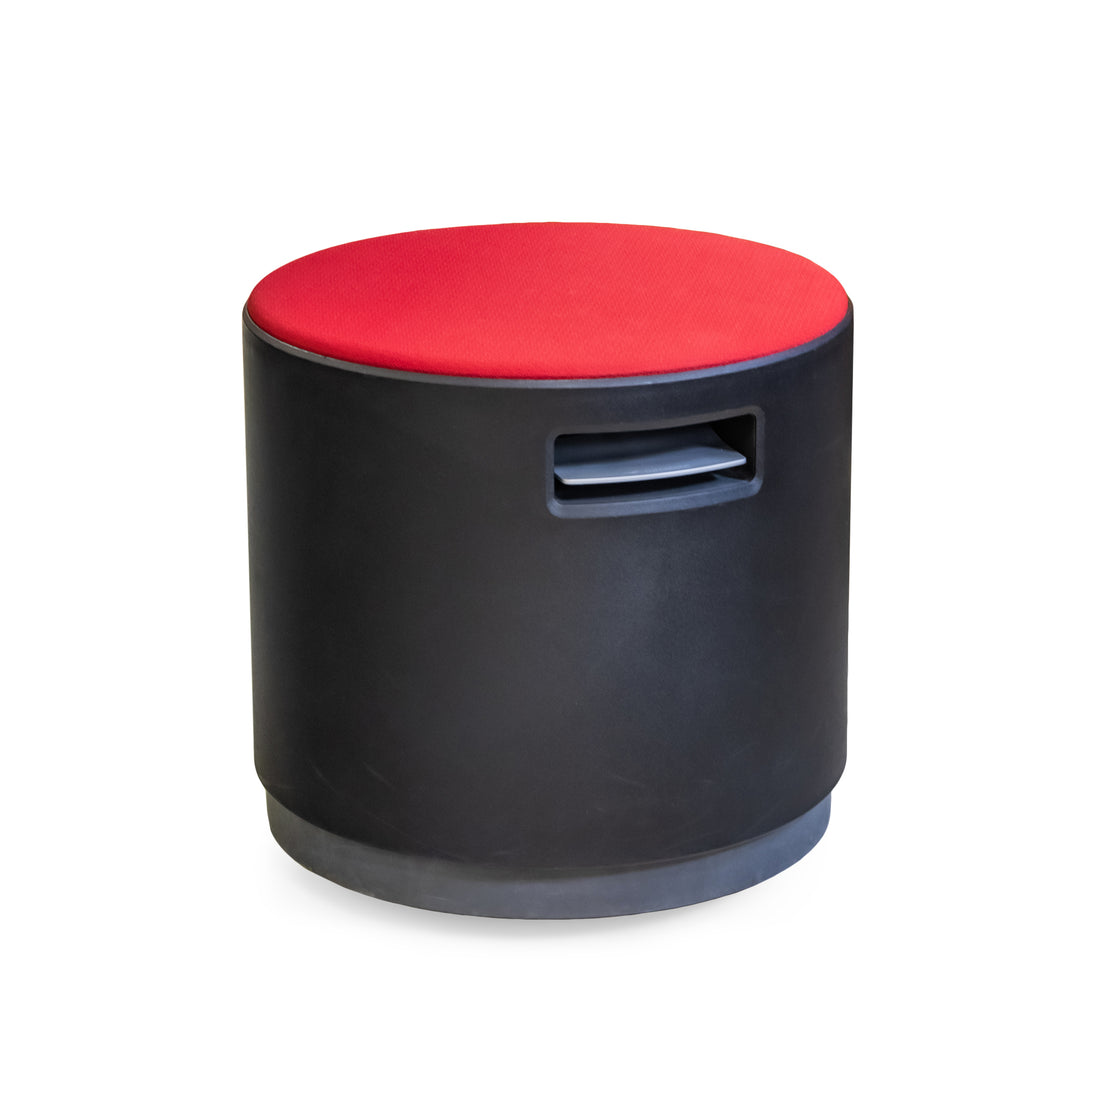 STEELCASE Turnstone Bouy Stool with Red Upholstery